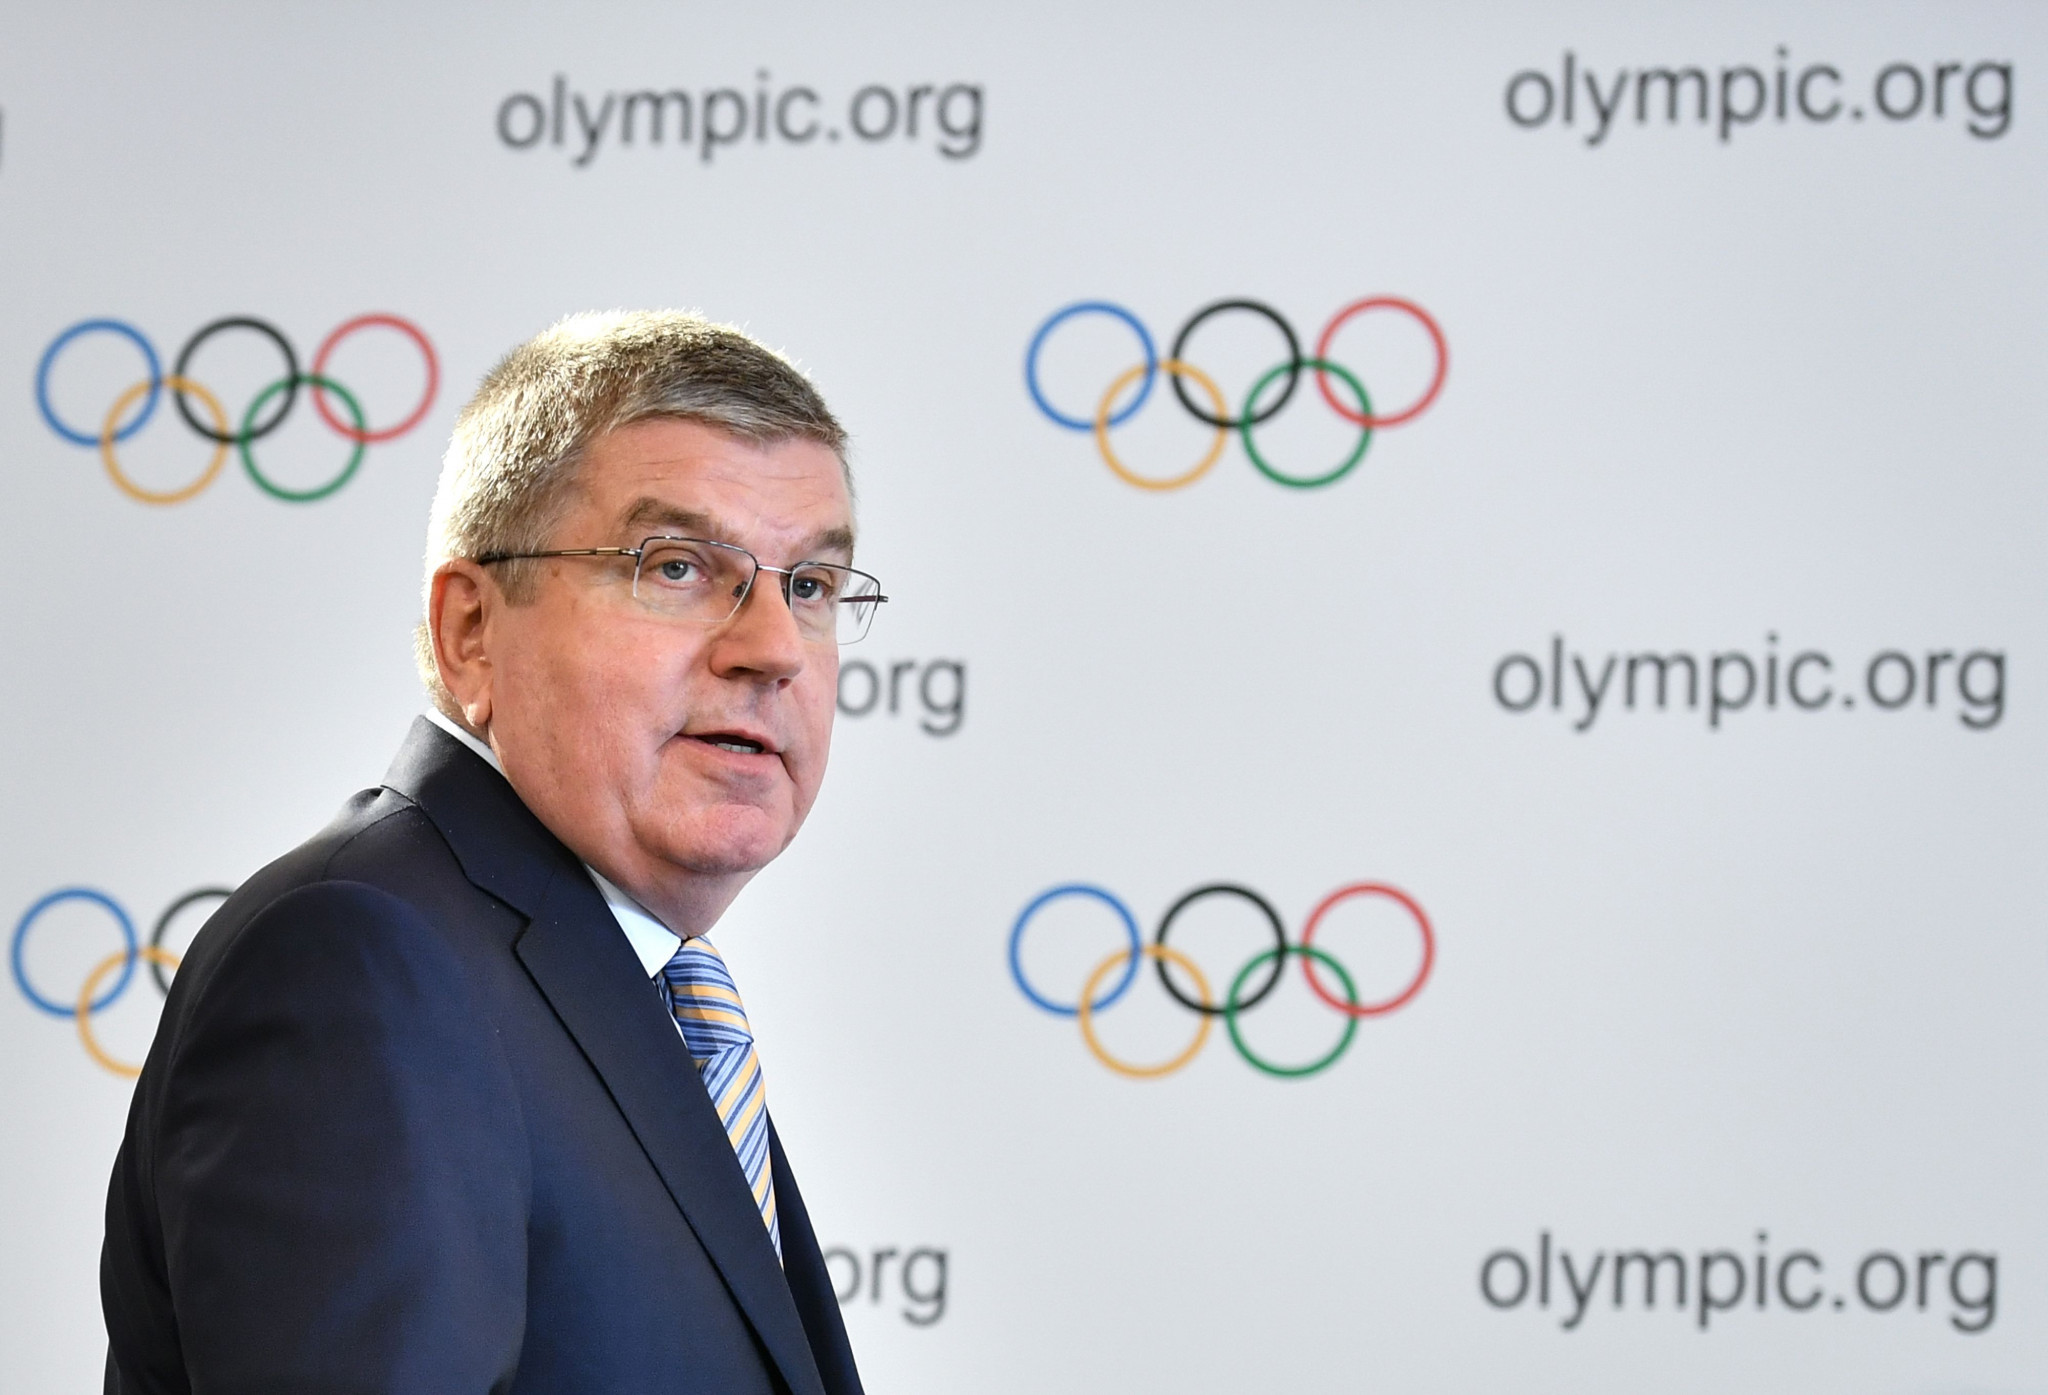 International Olympic Committee President Thomas Bach is in Indonesia to attend the Closing Ceremony of the 2018 Asian Games tomorrow ©Getty Images